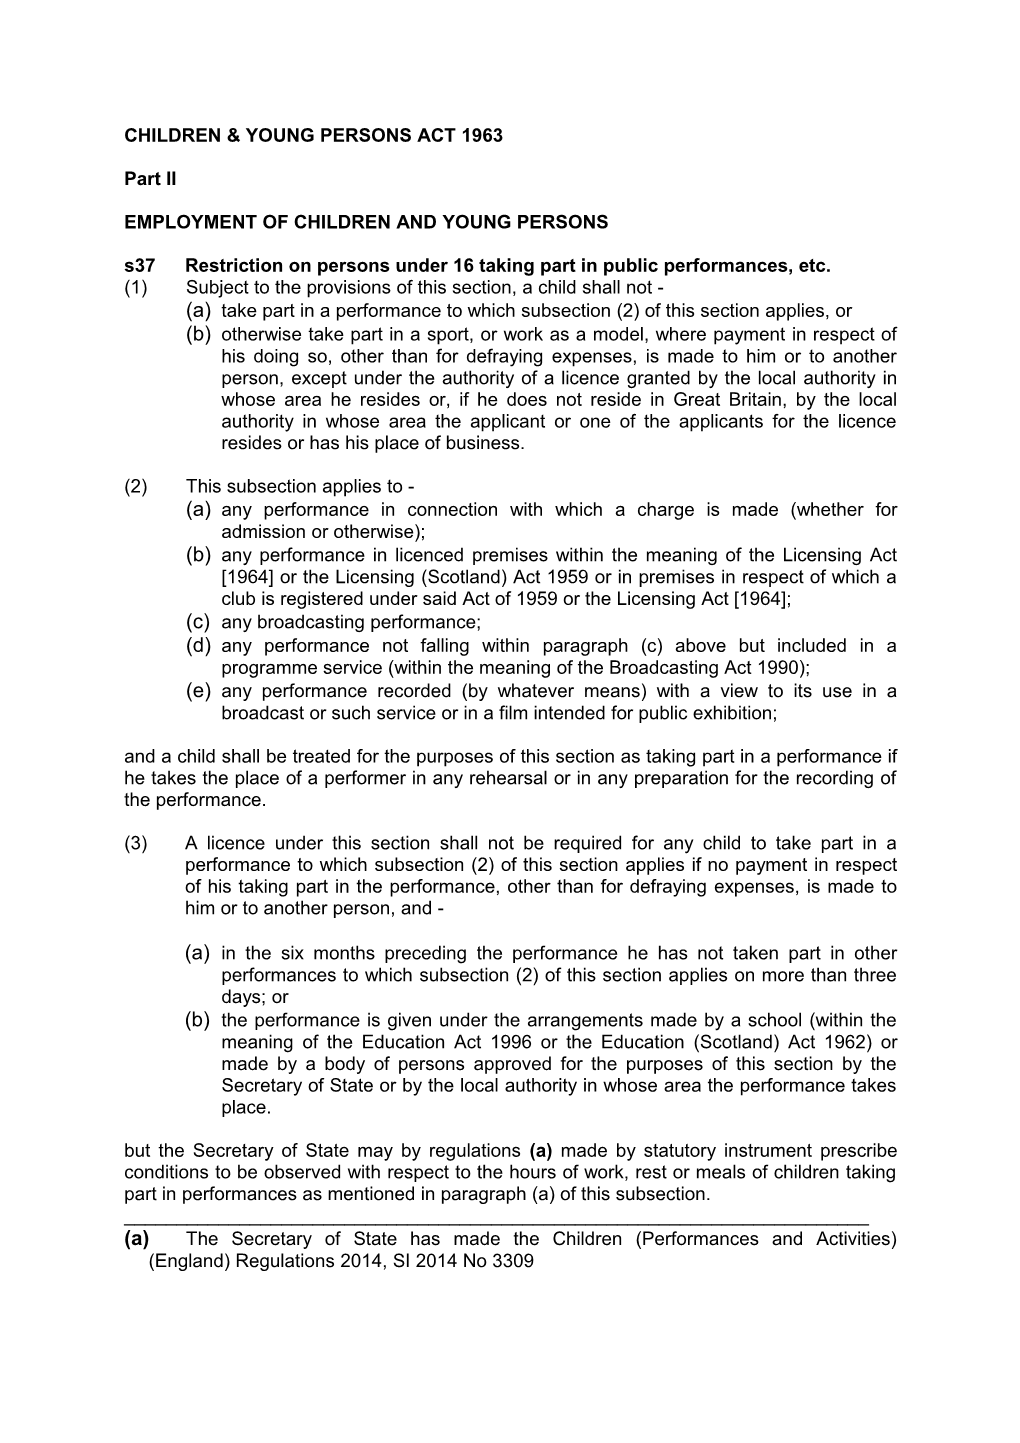 Children & Young Persons Act 1963